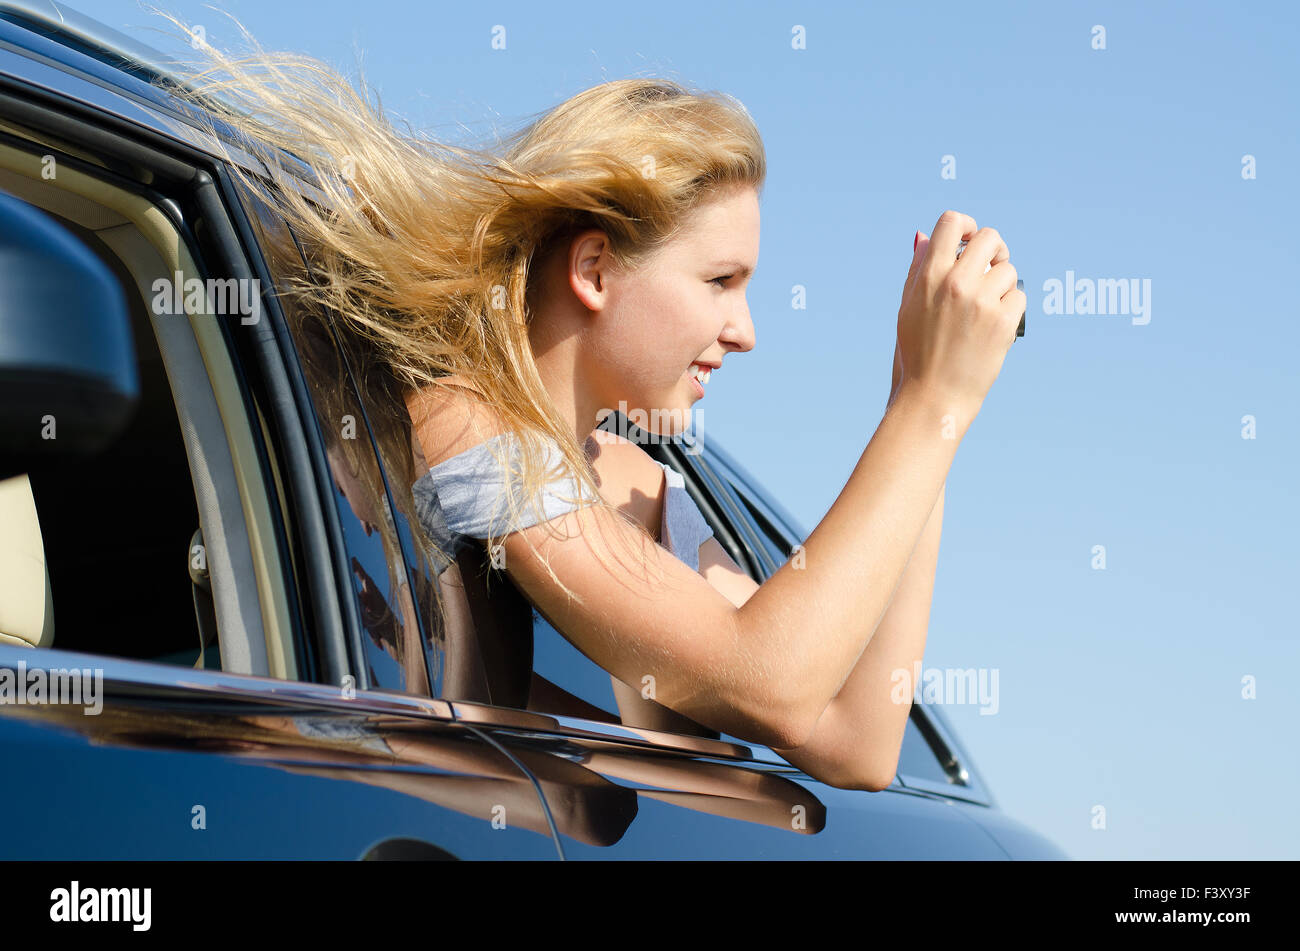 Woman in car taking photographs Stock Photo